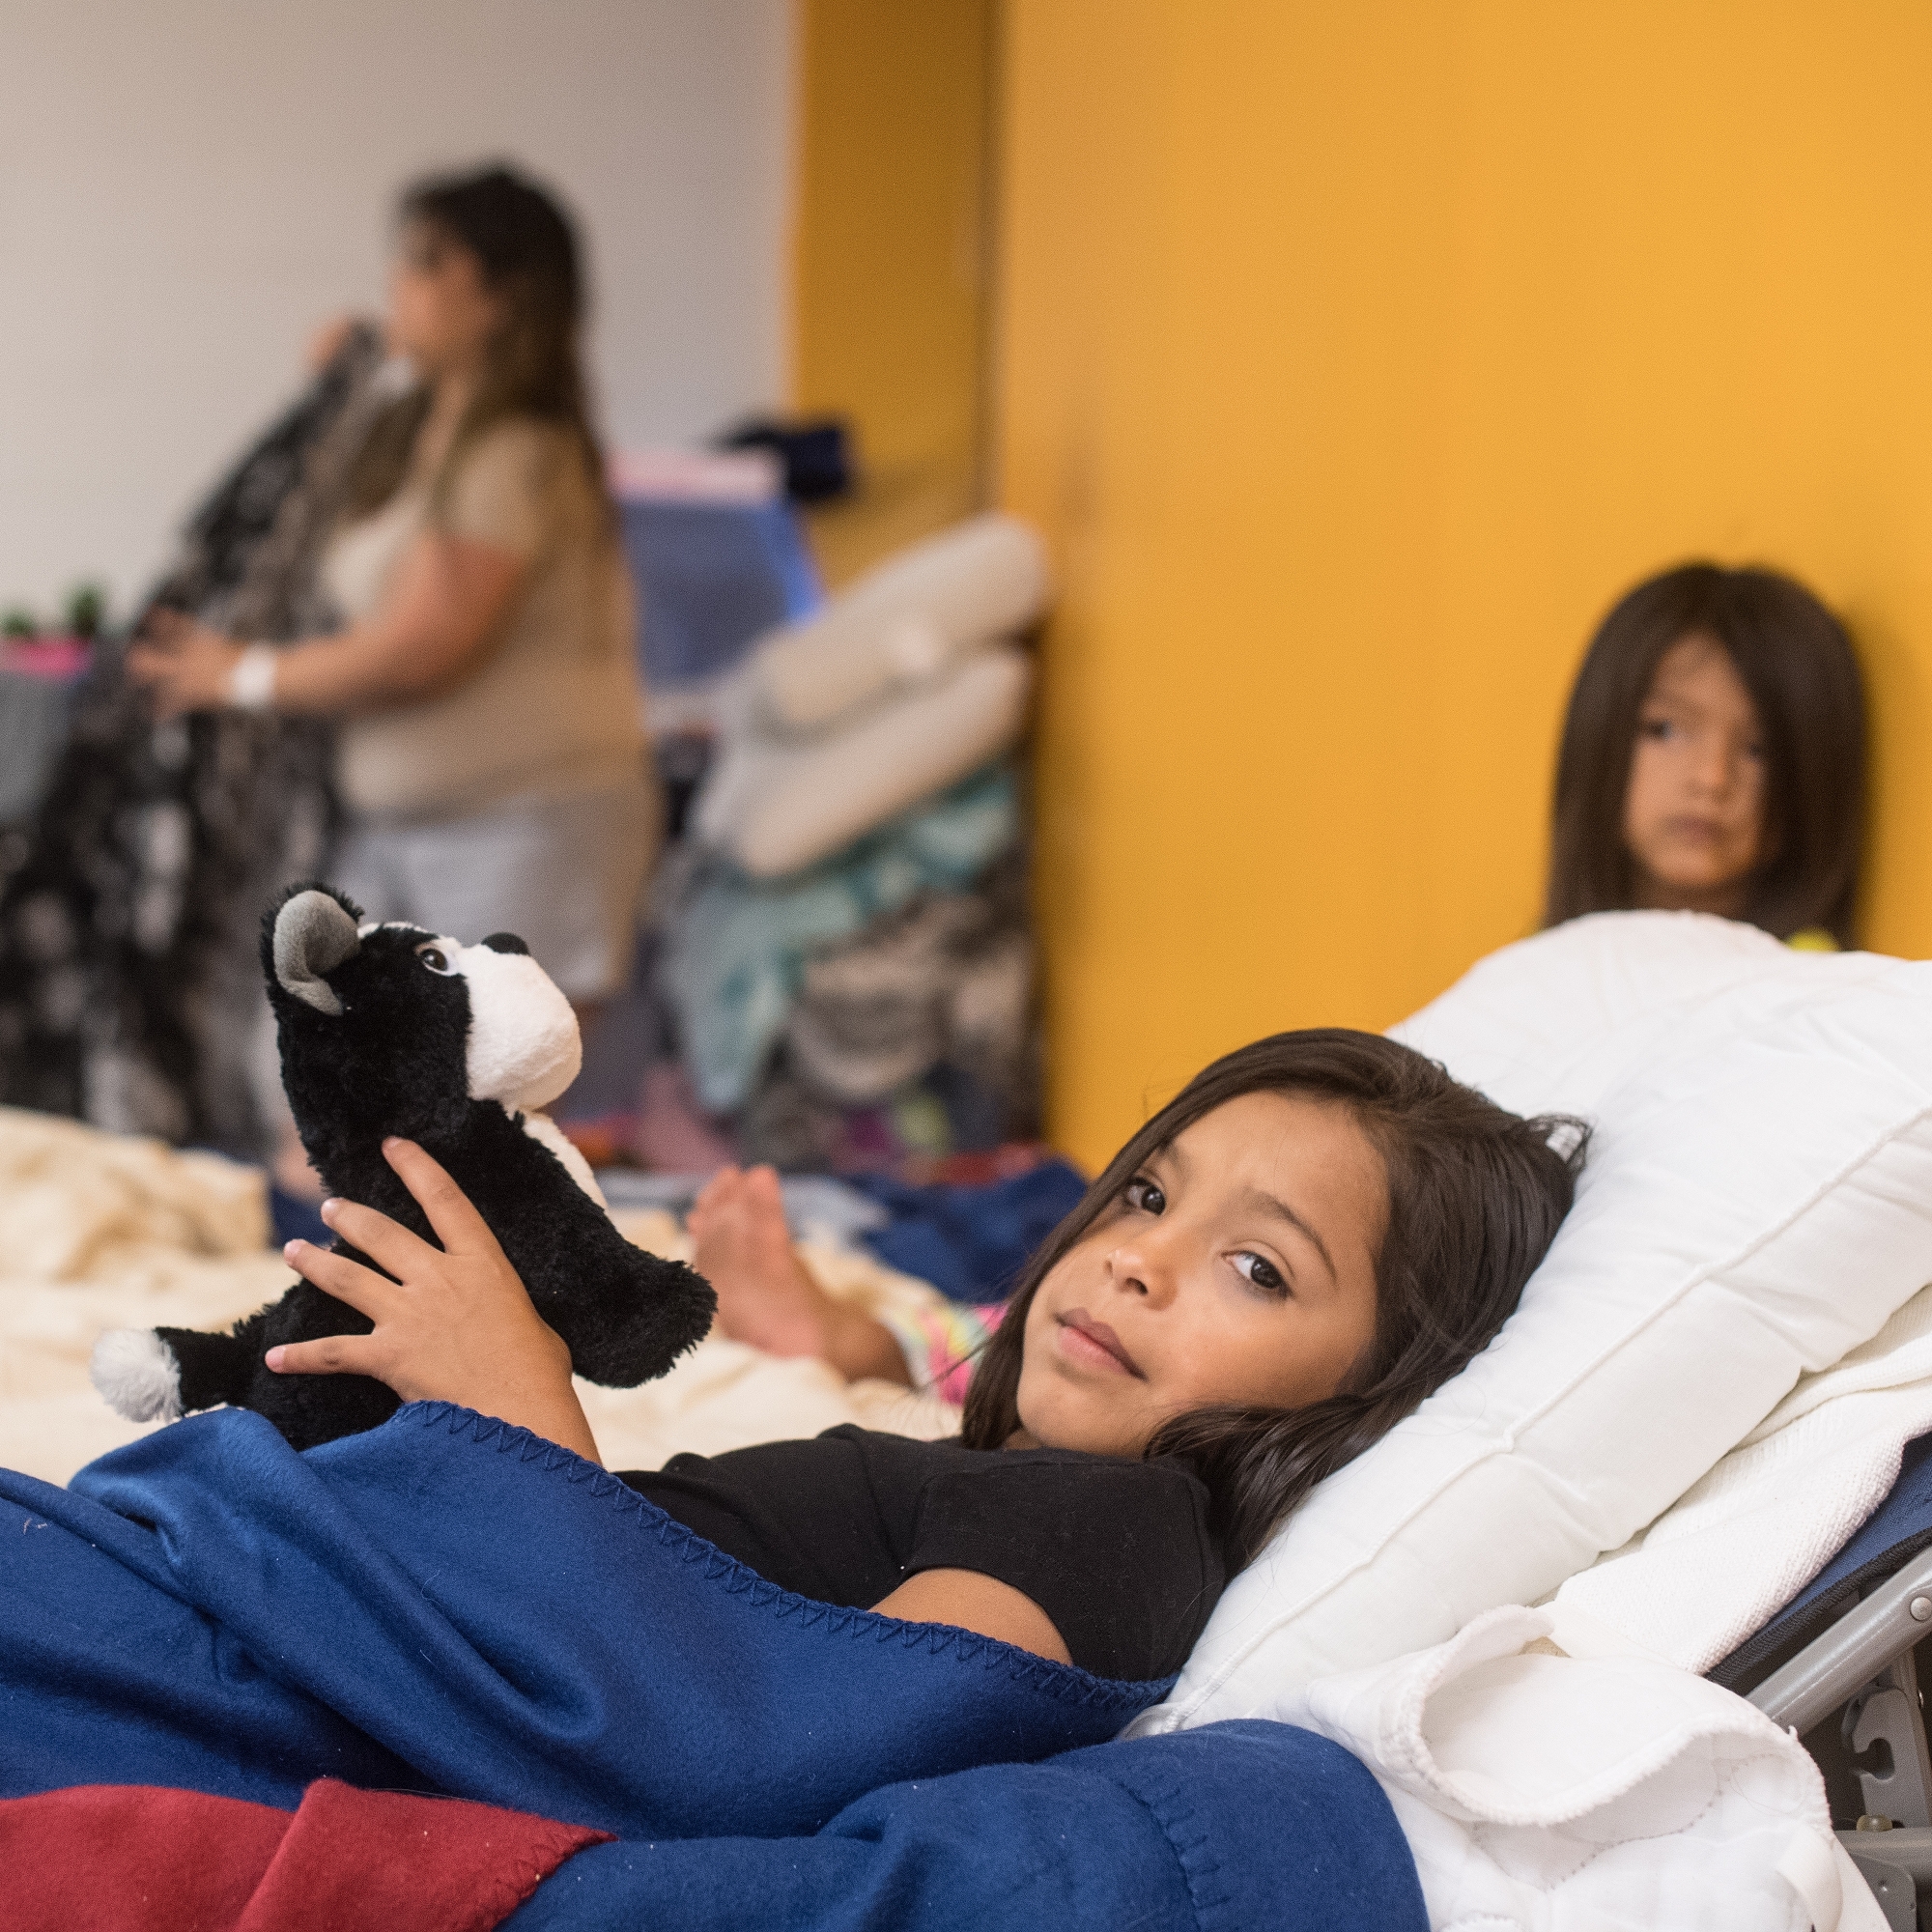 A 9 year-old girl is of 16 extended family members who evacuated together to the shelter for hurricane Harvey. All the children have been attending the Save the Children child-friendly space set up in the shelter. Photo Credit: Susan Warner/Save the Children 2017.